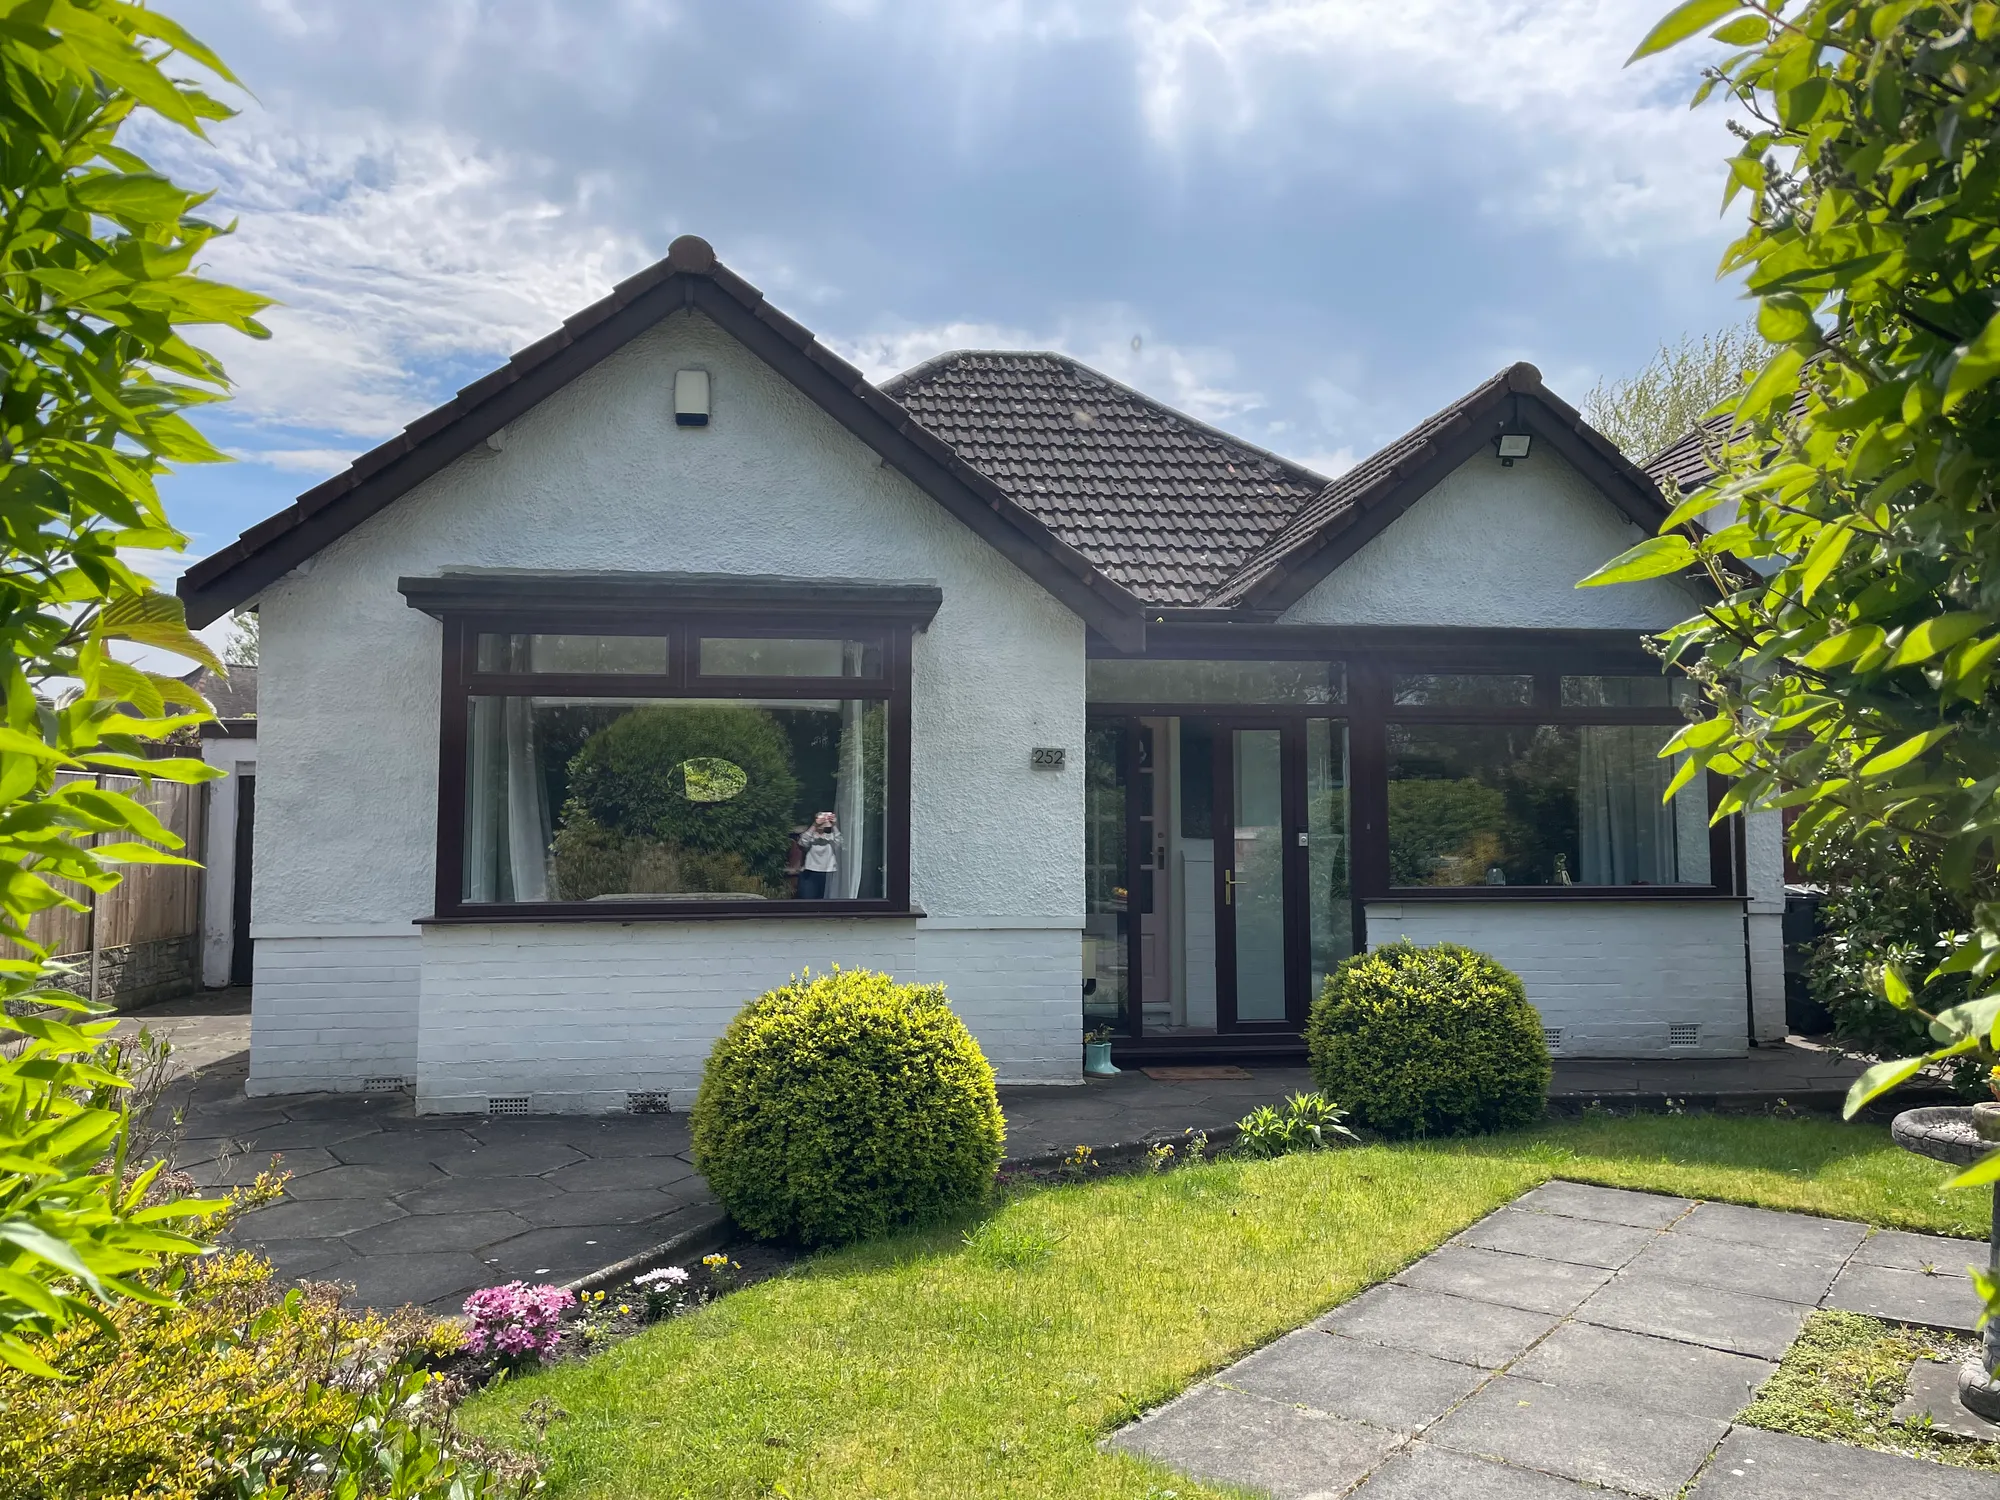 Introducing an exquisite detached bungalow nestled within the highly sought-after location of Hale, offering the best of convenience and tranquility.